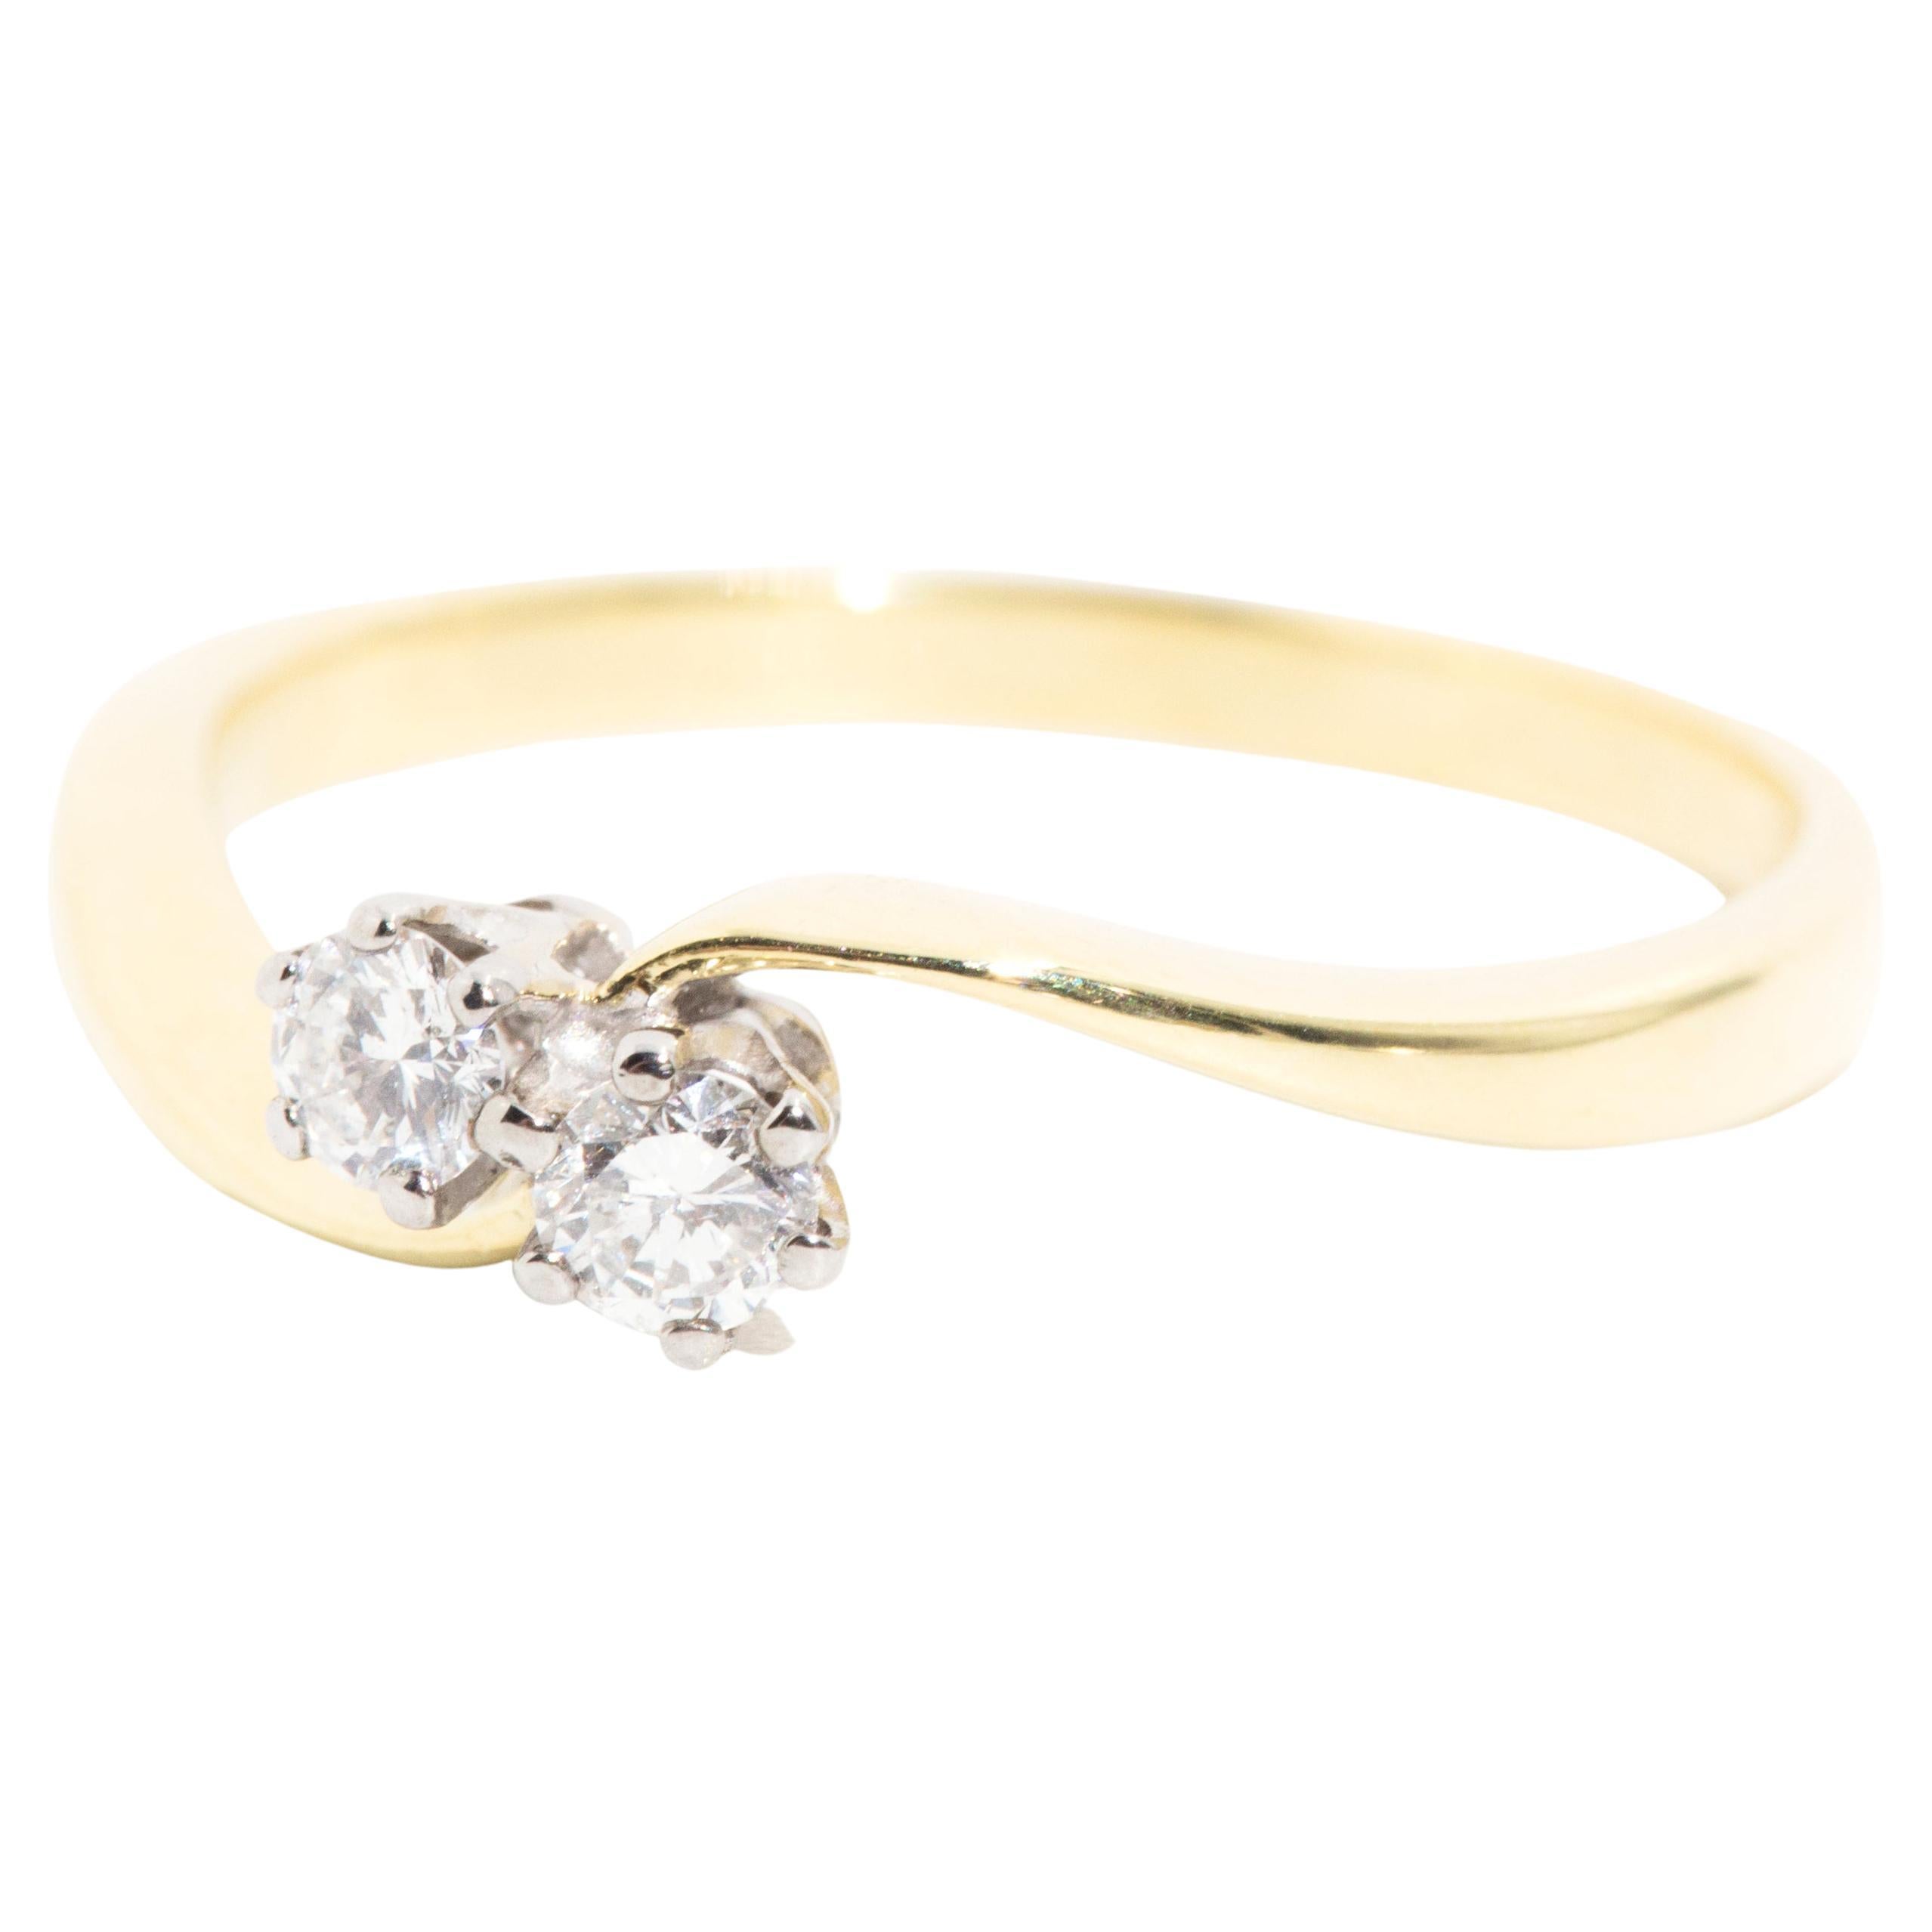 Crafted in 18 carat yellow gold, this whimsical vintage Toi Et Moi ring features a lovely centrepiece duo of shimmering round brilliant cut diamonds. We have named this lovely vintage ring The Renee Ring. Her petite size makes her perfect to wear